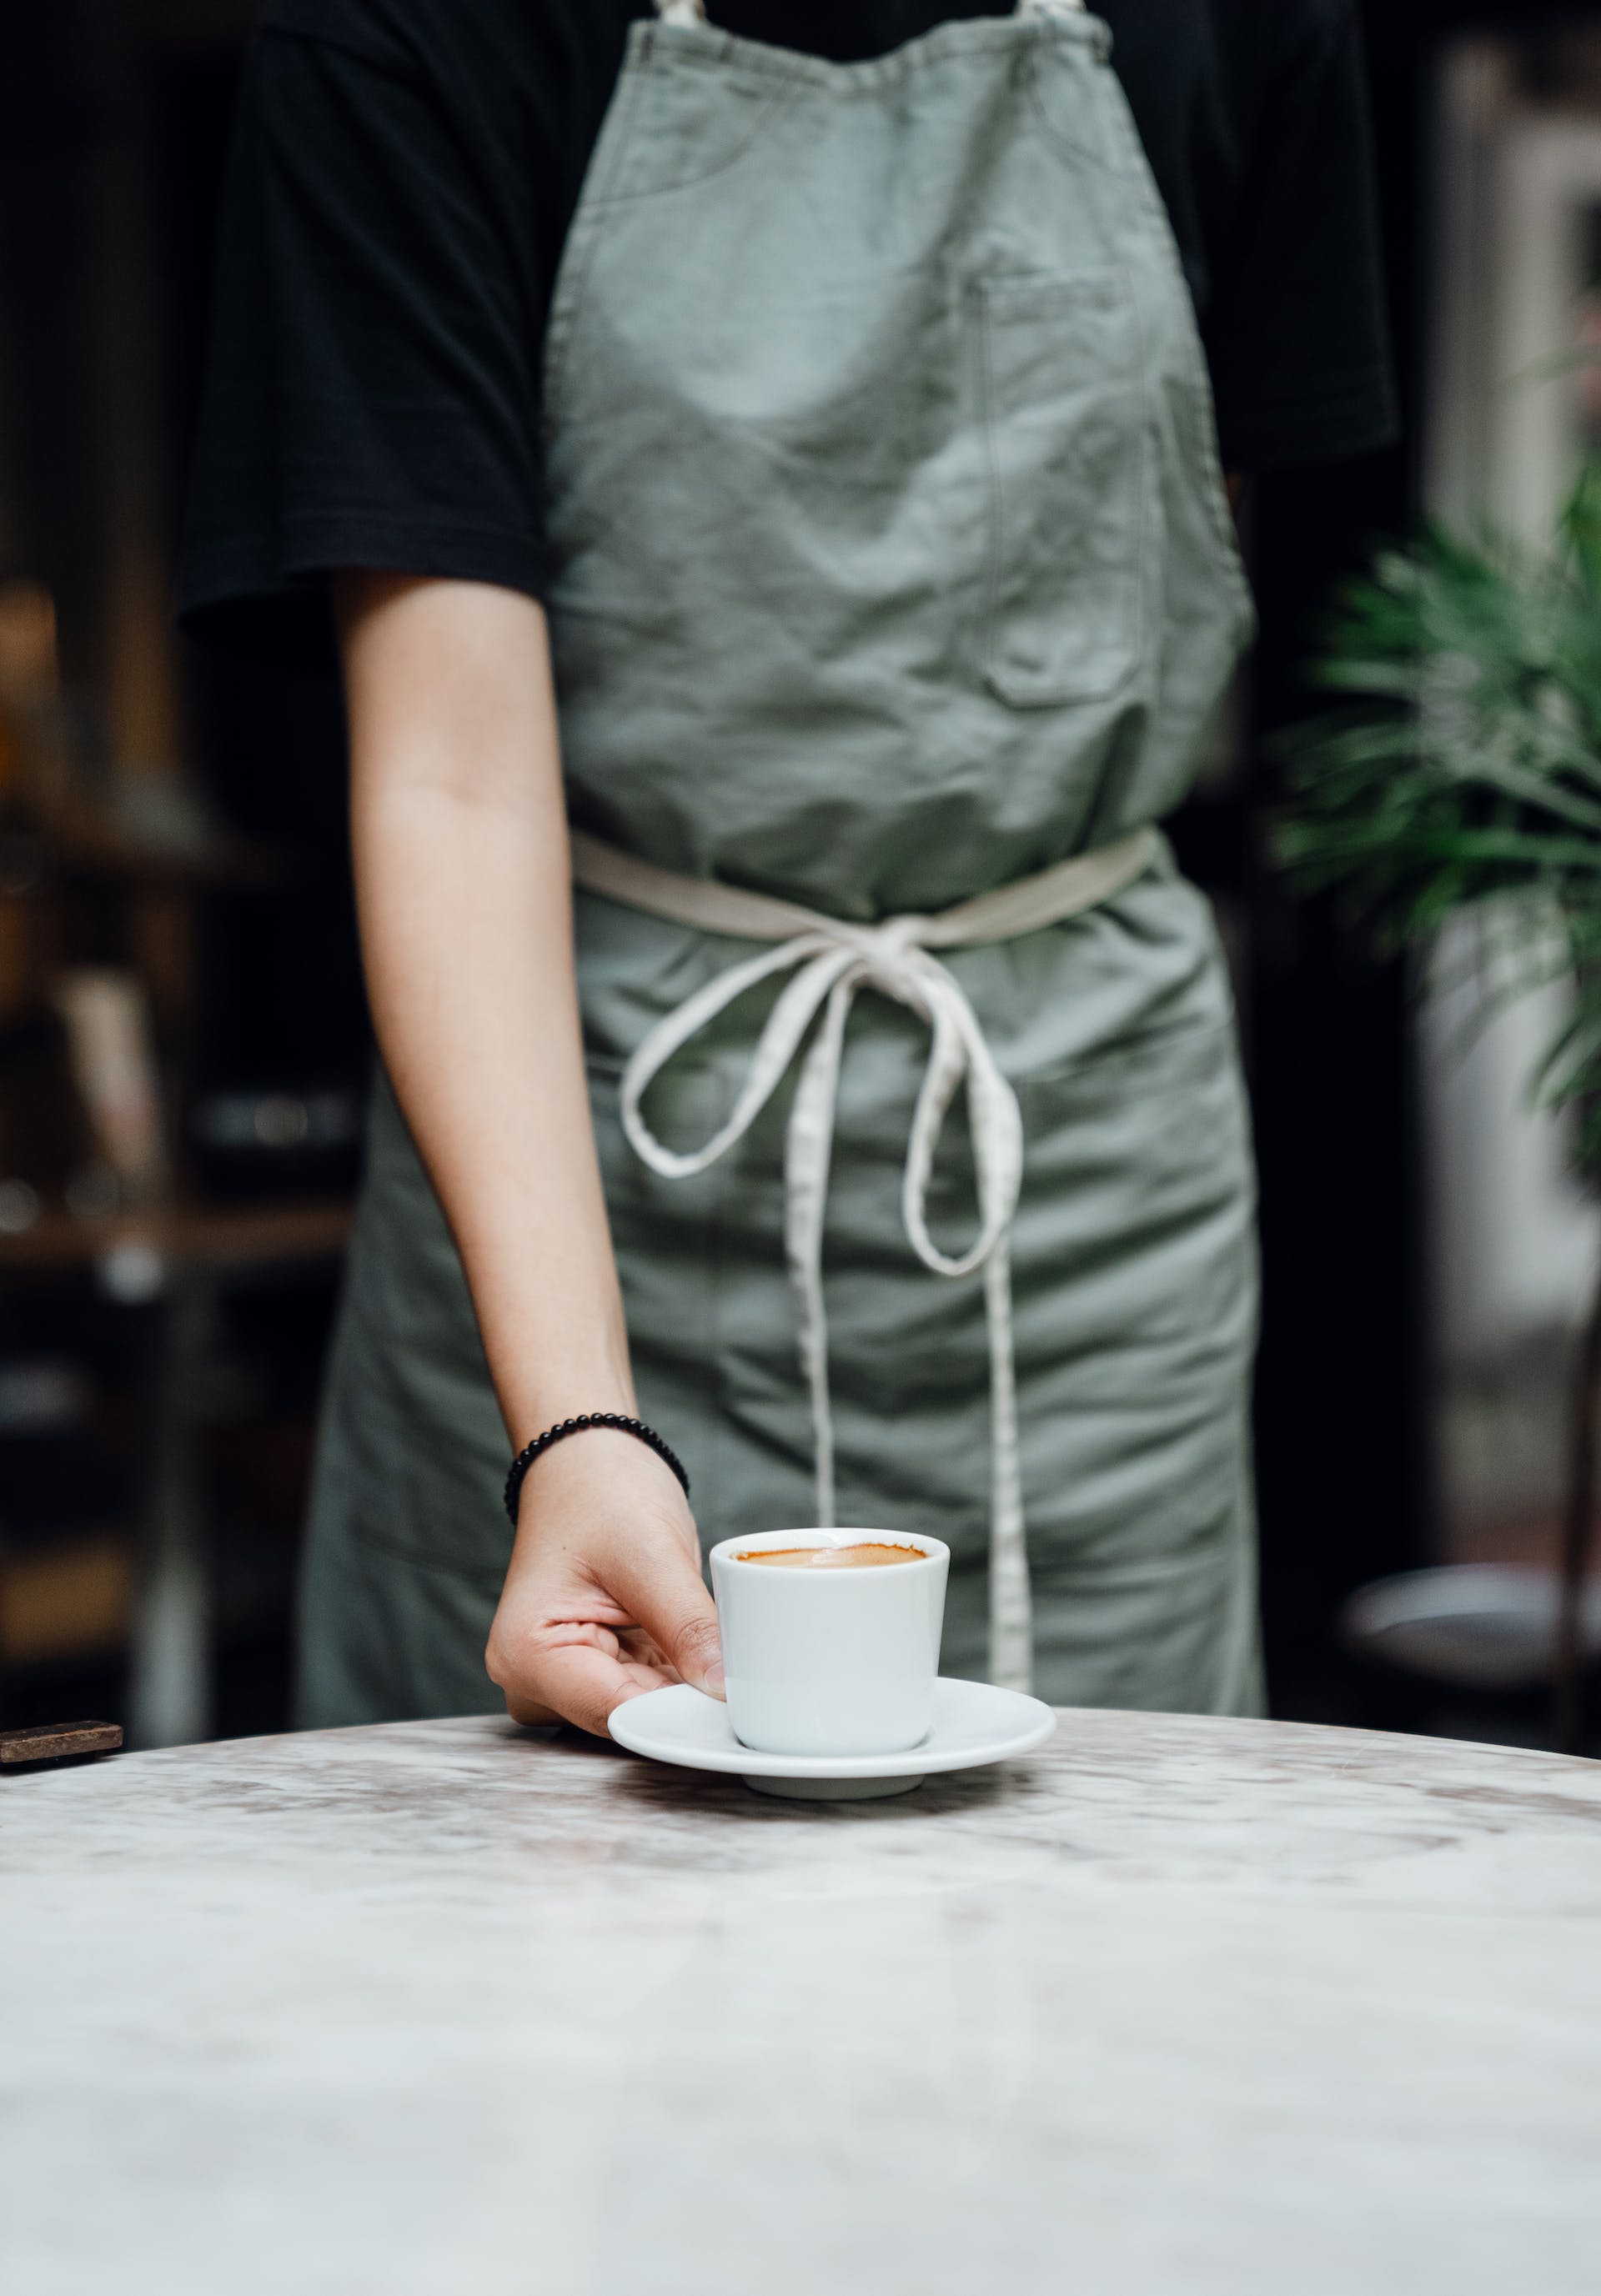 A waitress holding a cup of coffee | Source: Pexels